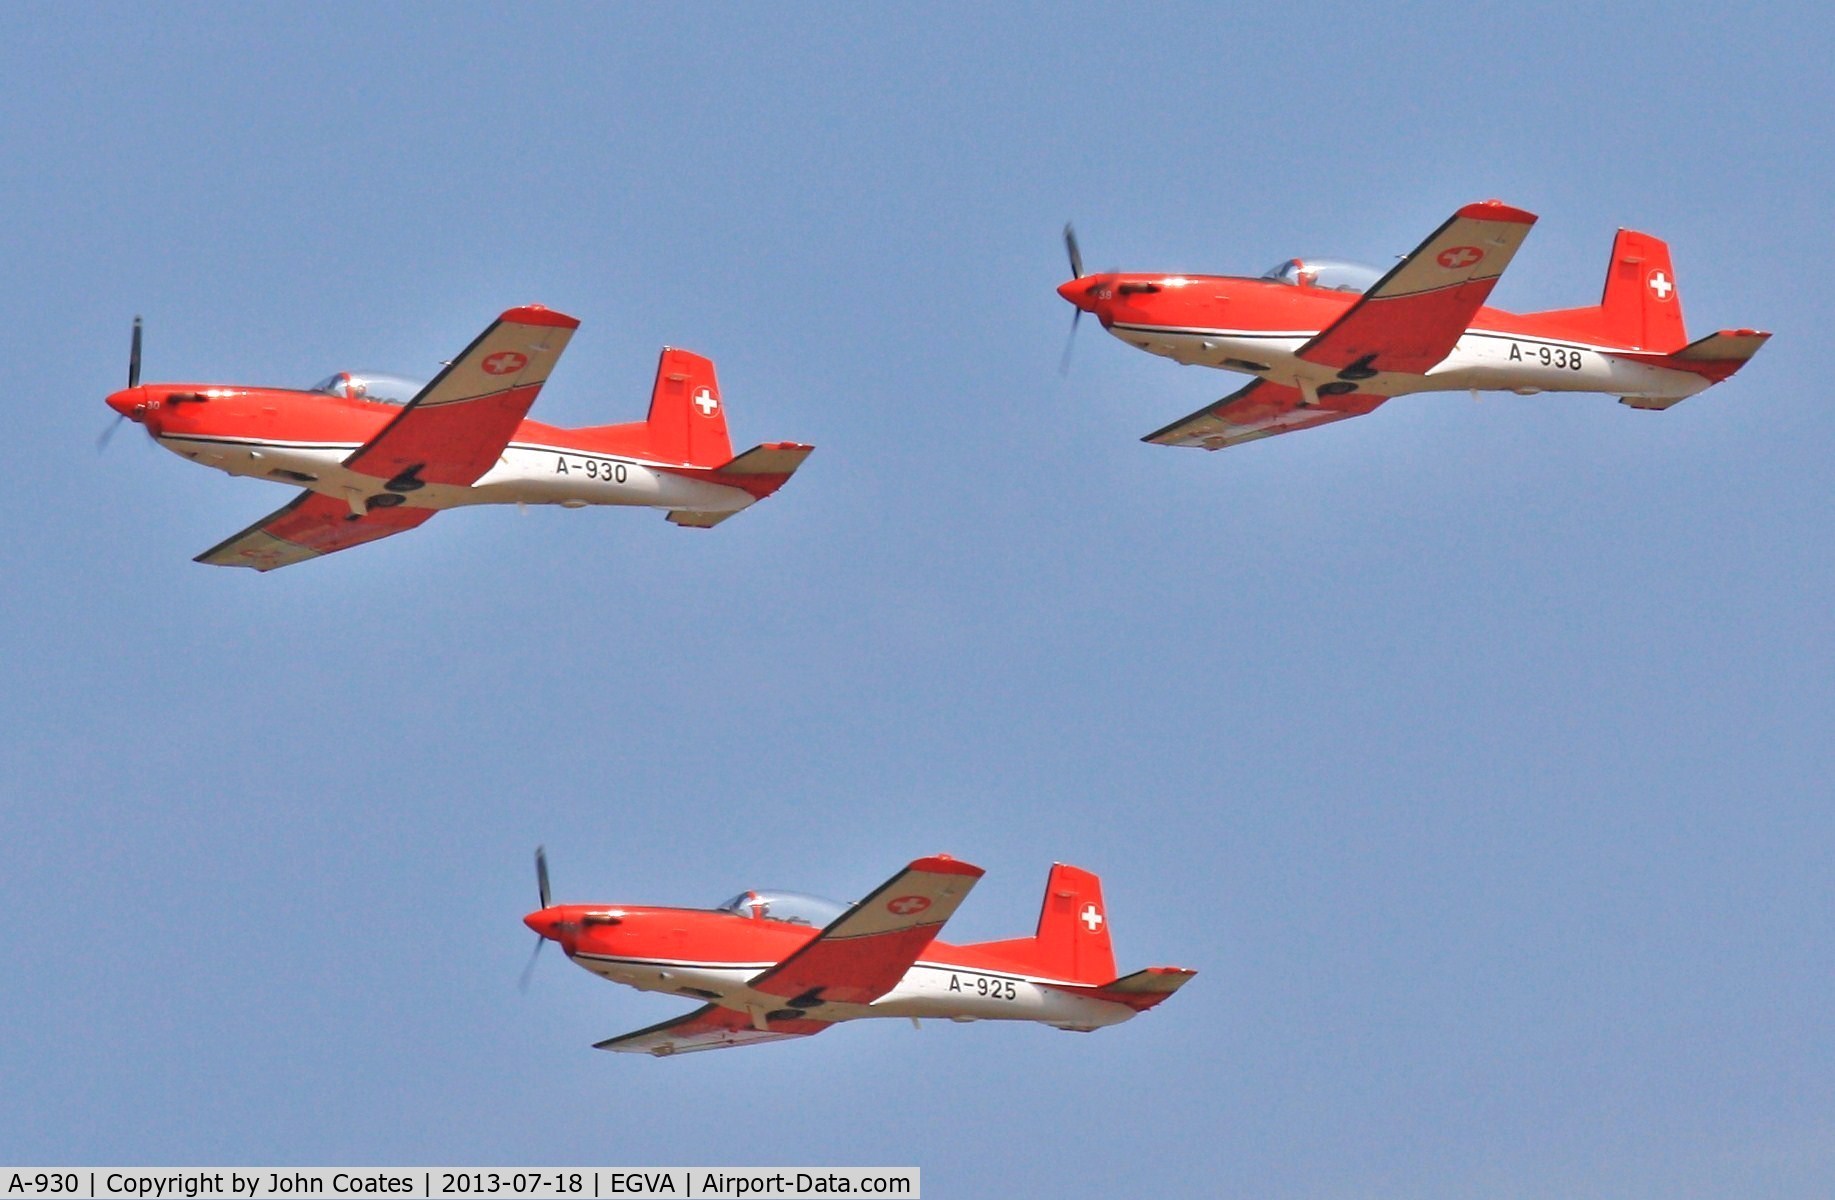 A-930, 1983 Pilatus PC-7 Turbo Trainer C/N 338, Arriving at RIAT with A-925 and A-938 Swiss Team PC7s.